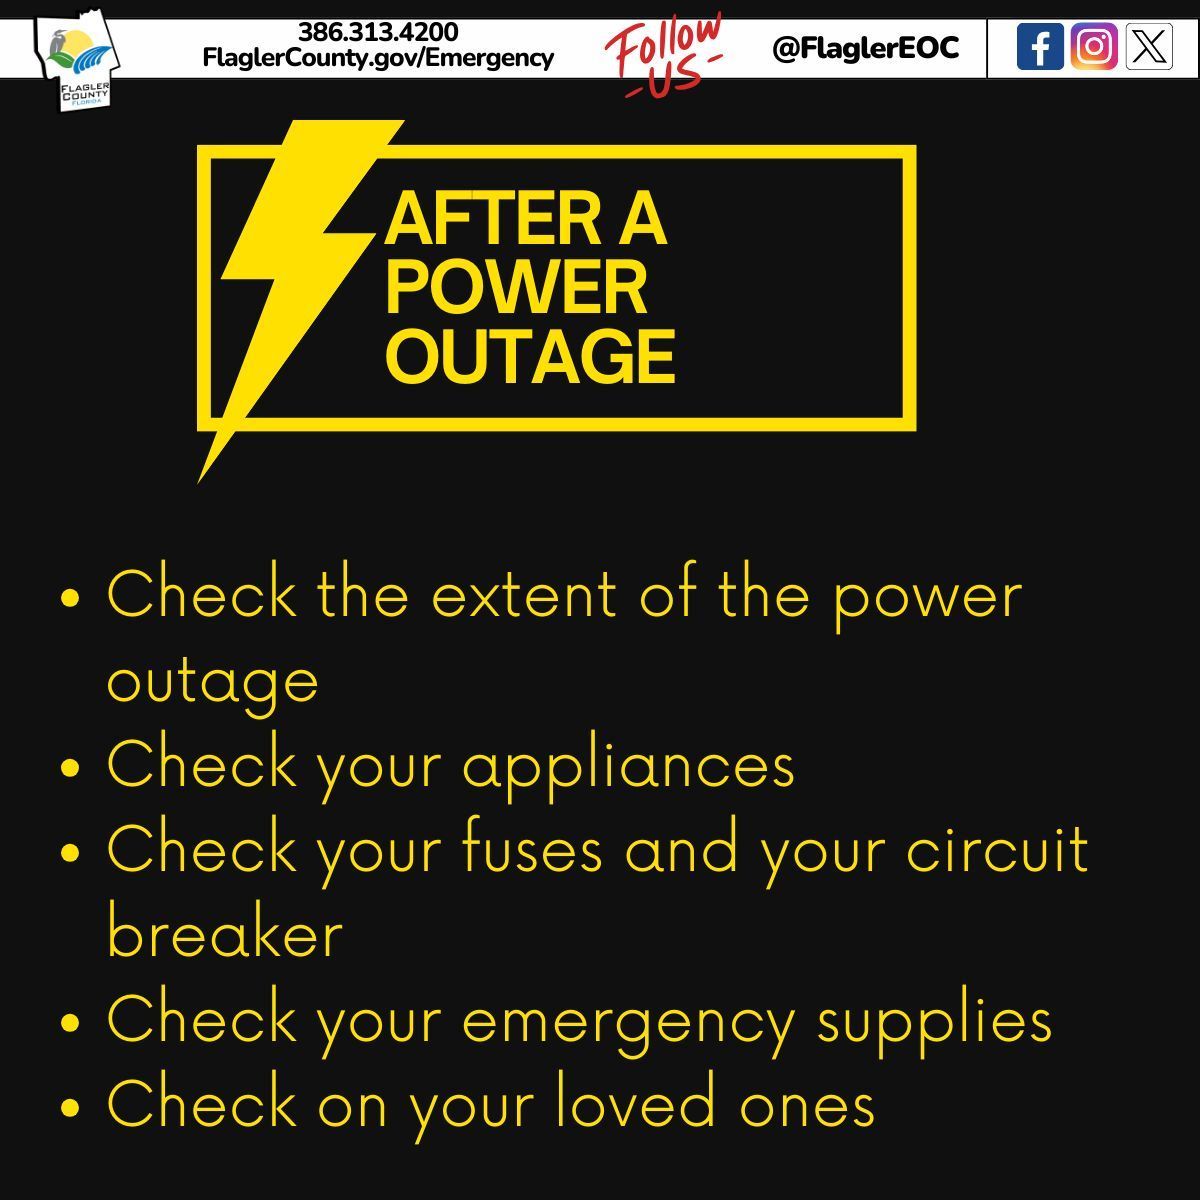 Did everyone lose power or just you? 
Make sure you check your circuit breakers along with all your appliances, the last thing you want it to start a fire because something burned or tripped. 

#Flaglereoc #Flaglercounty #beready